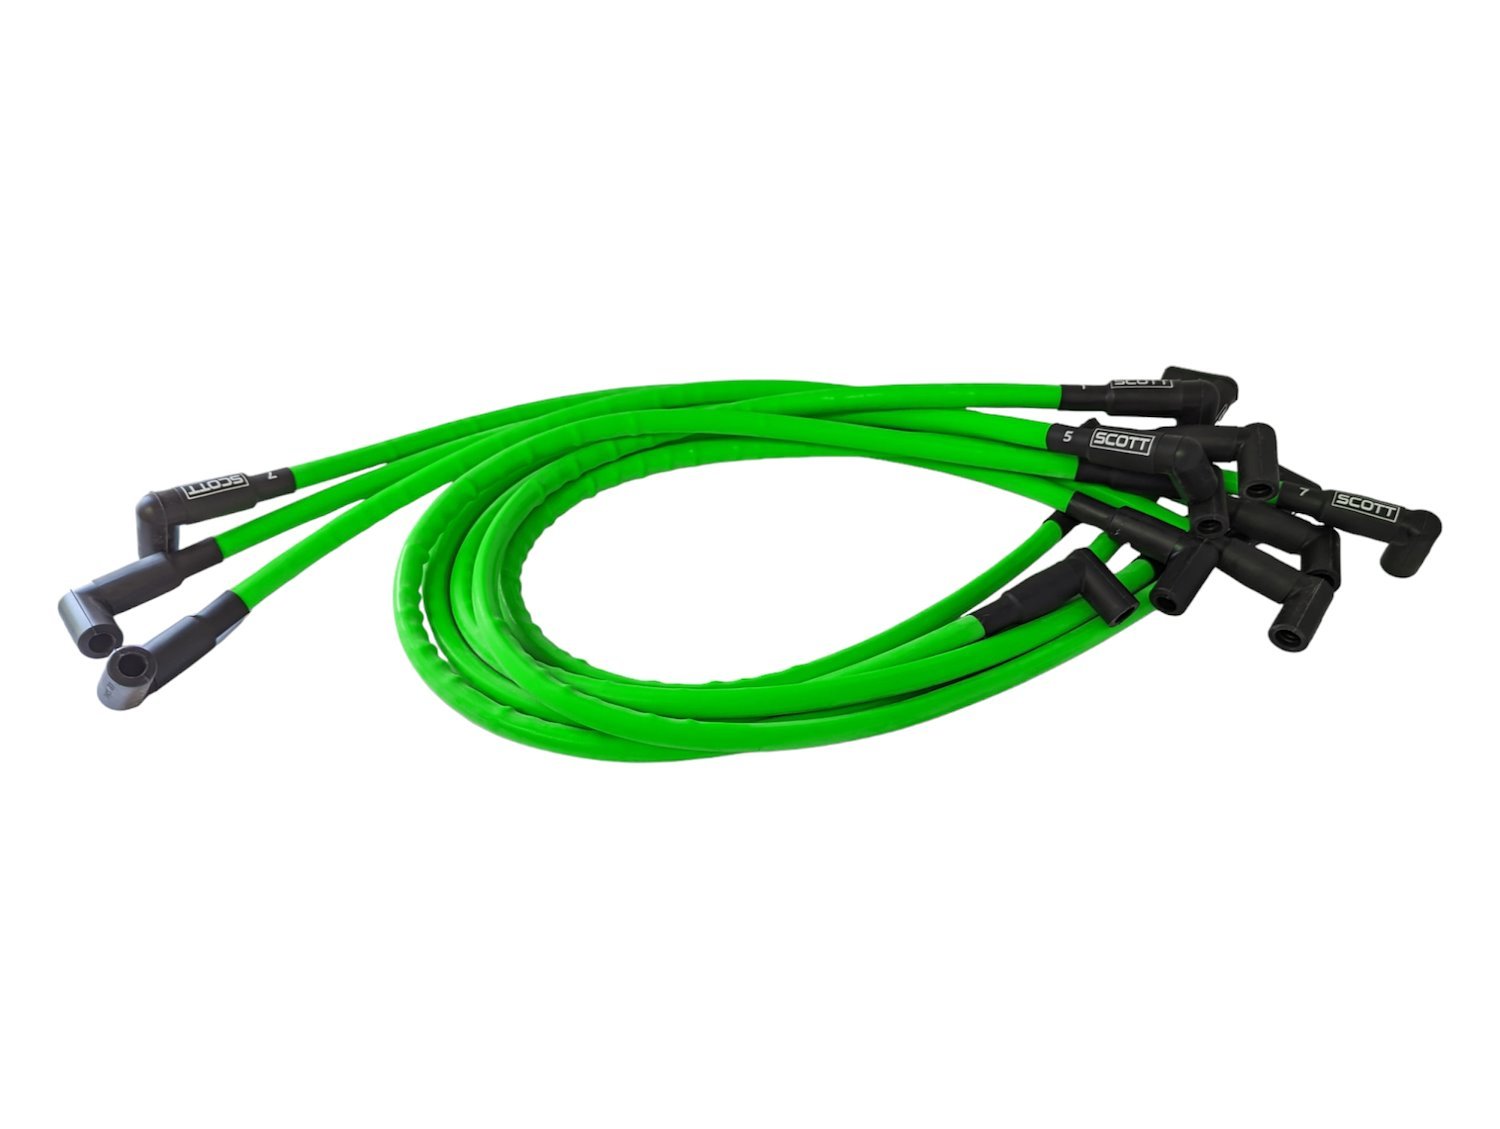 SPW-CH-402-8 High-Performance Silicone-Sleeved Spark Plug Wire Set for Small Block Chevy, Over Valve Cover [Fluorescent Green]